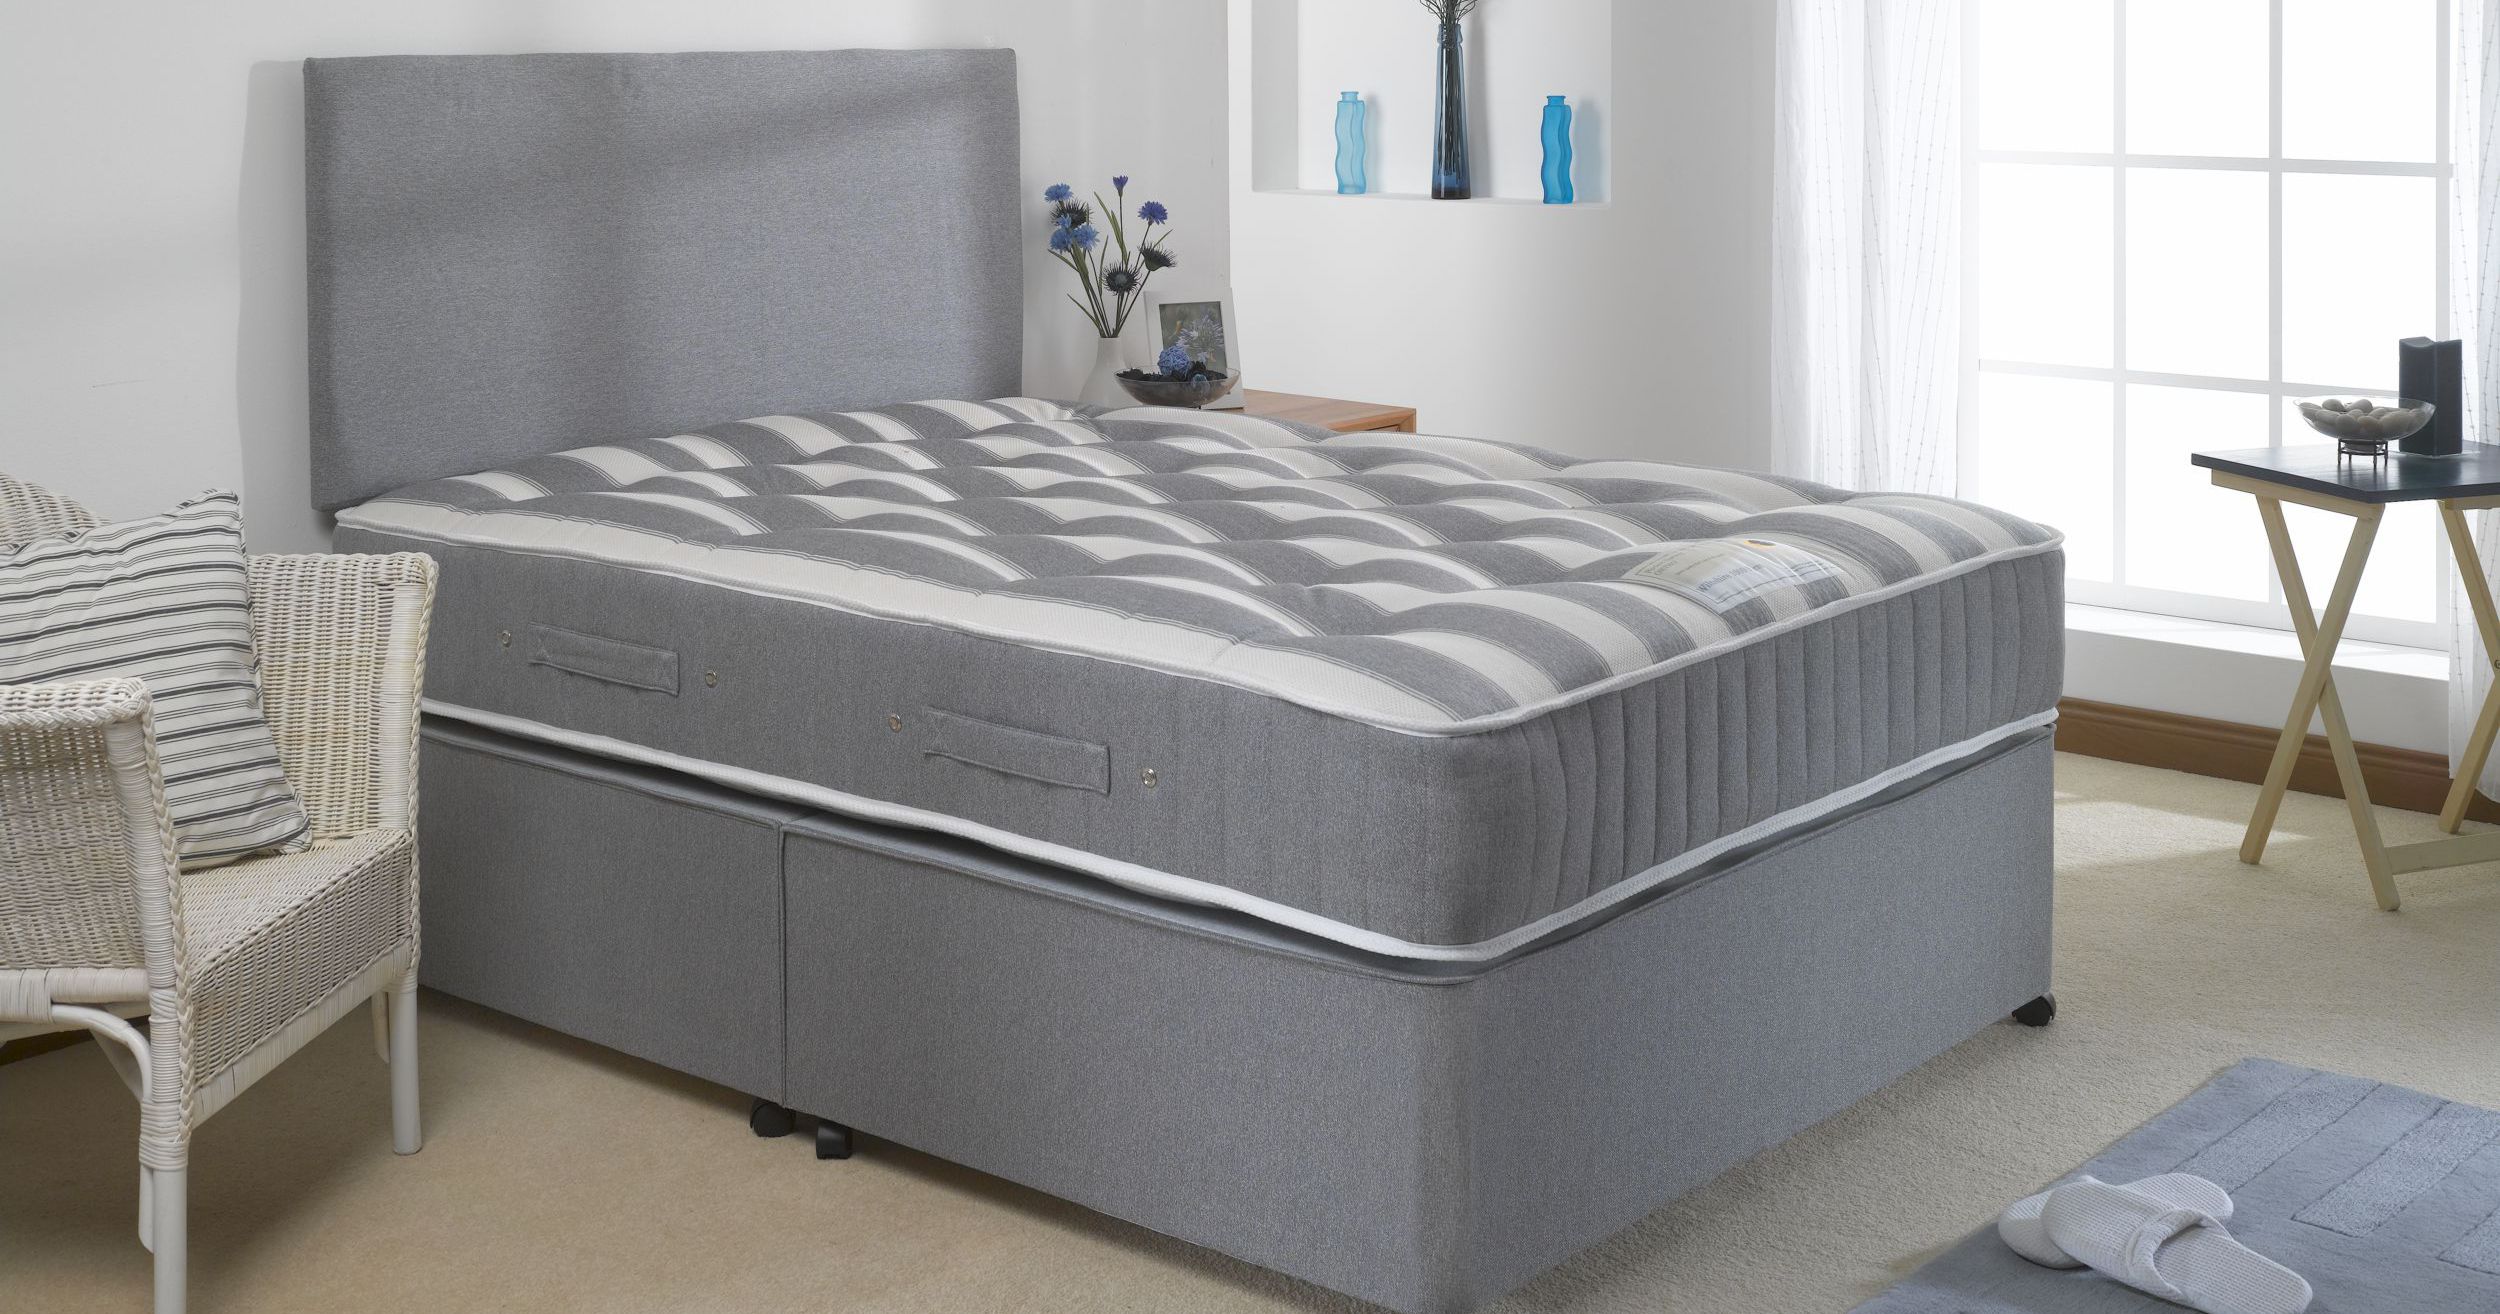 Arun Furnishers Ltd based in Littlehampton, West Sussex supply quality furniture for the home -beds